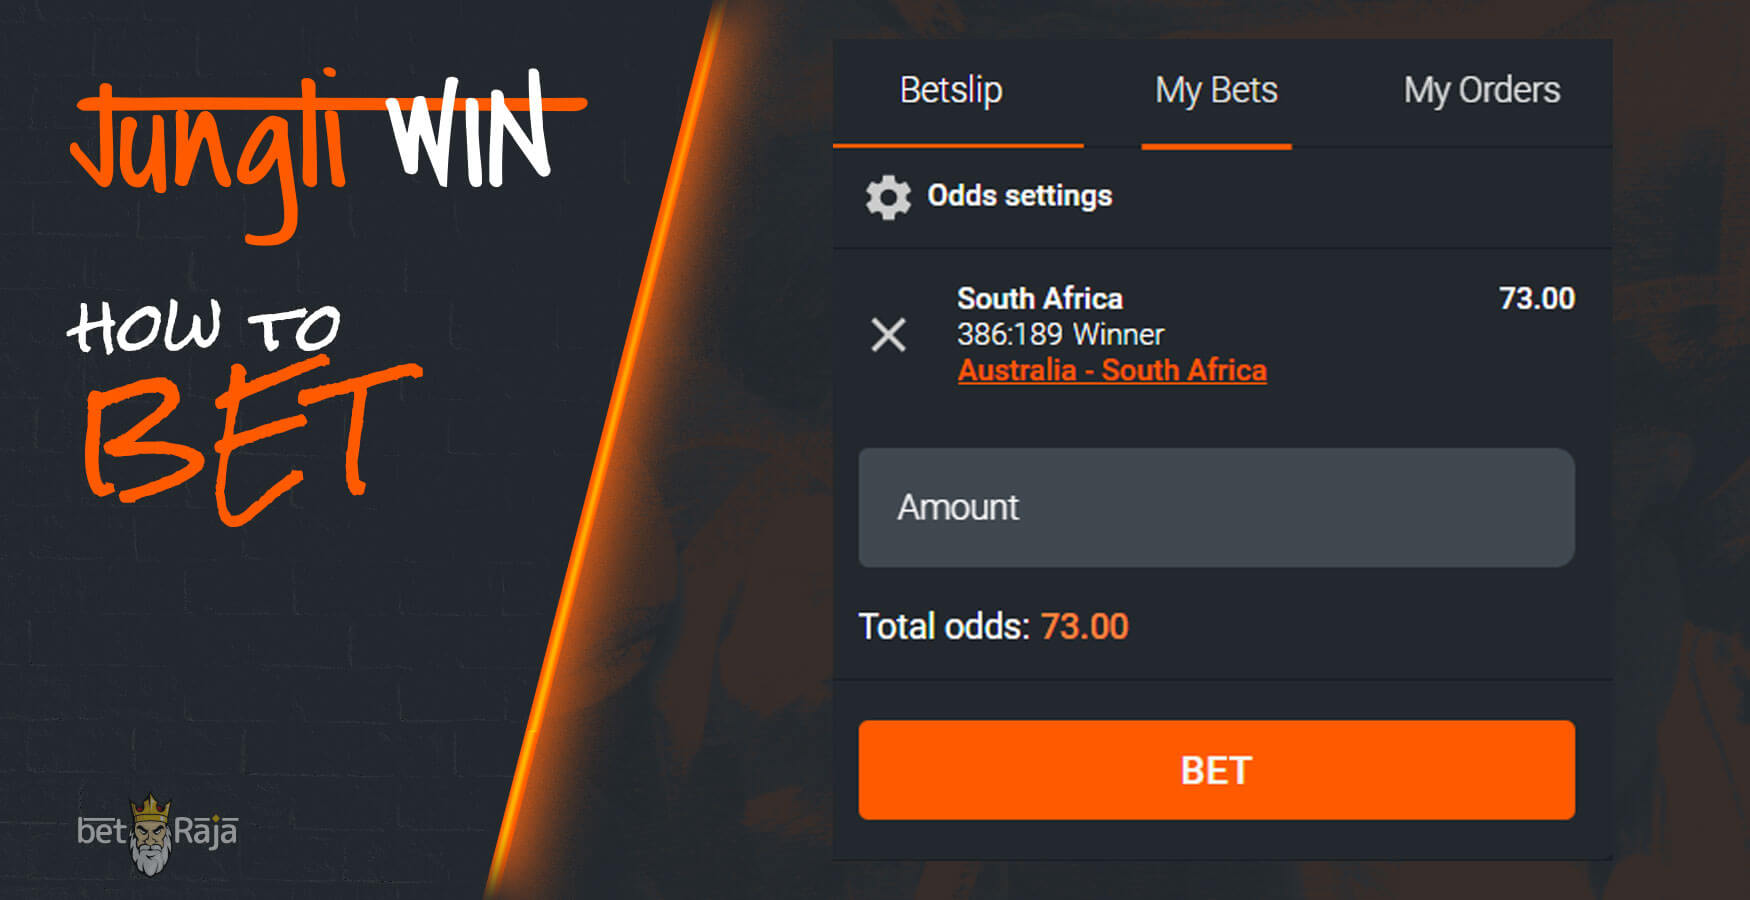 The most detailed way how to bet.